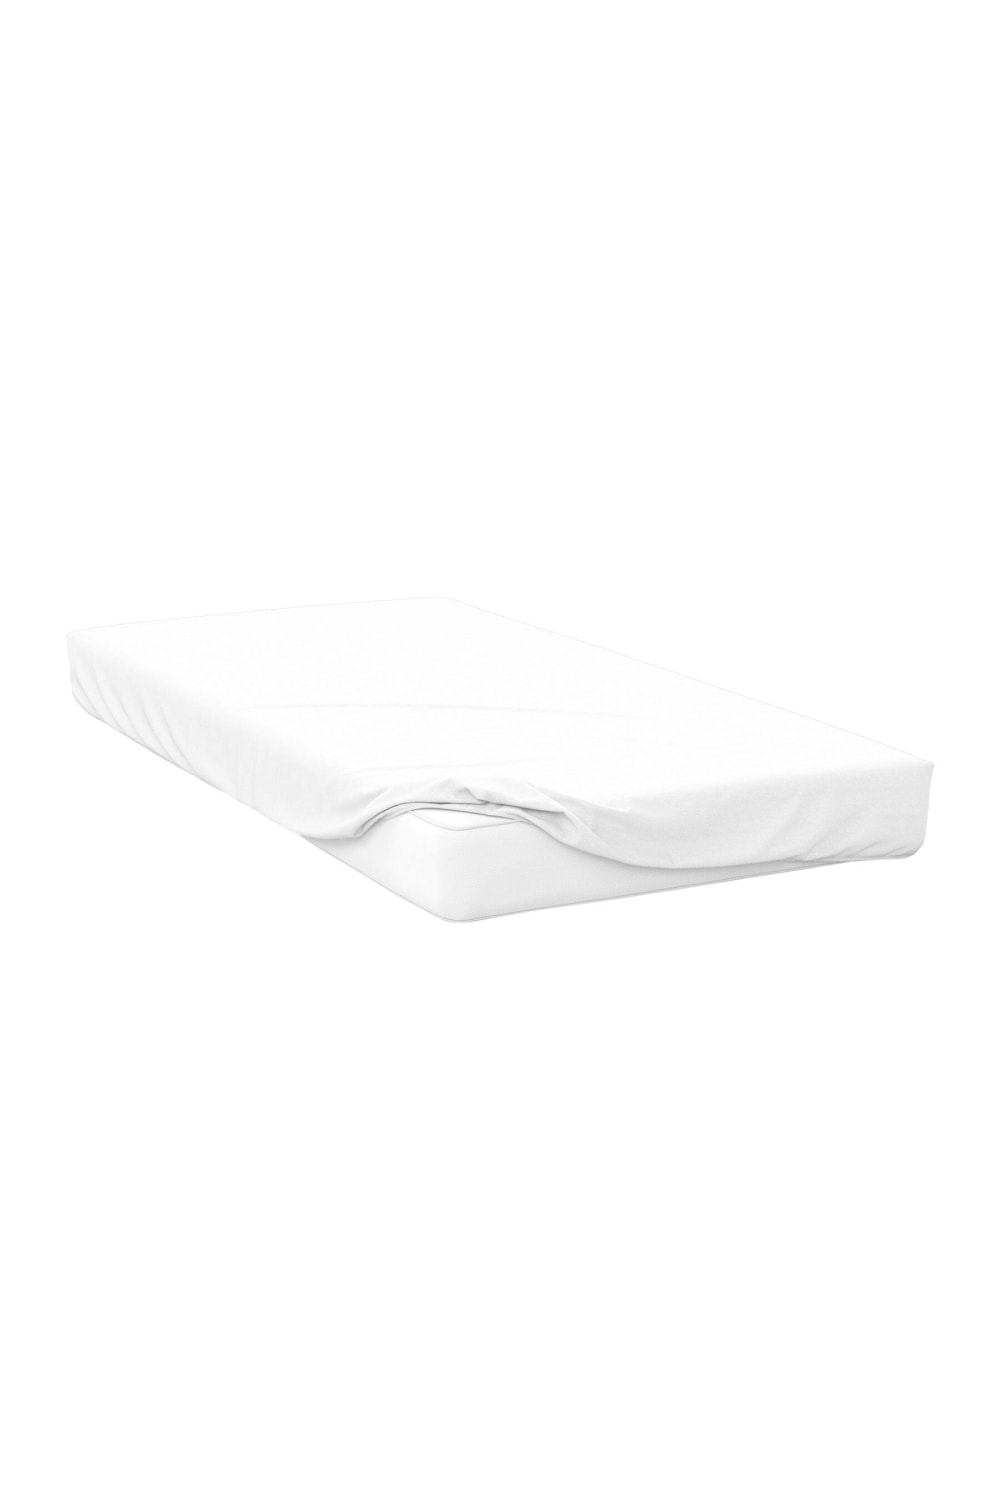 Belledorm 400 Thread Count Egyptian Cotton Extra Deep Fitted Sheet (White) (King) (UK - Superking)